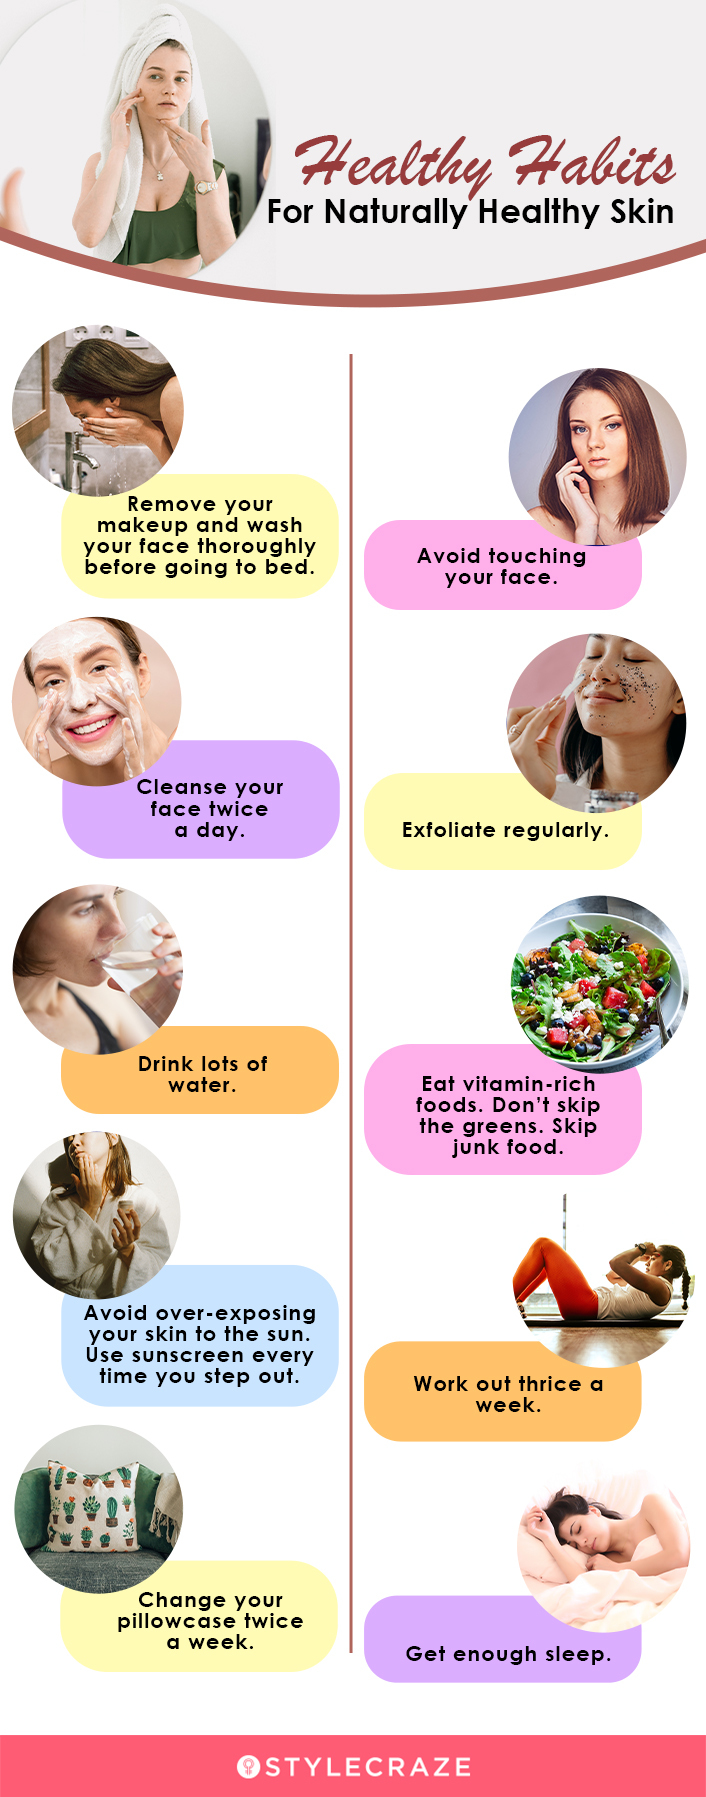 healthy habits for naturally healthy skin [infographic]